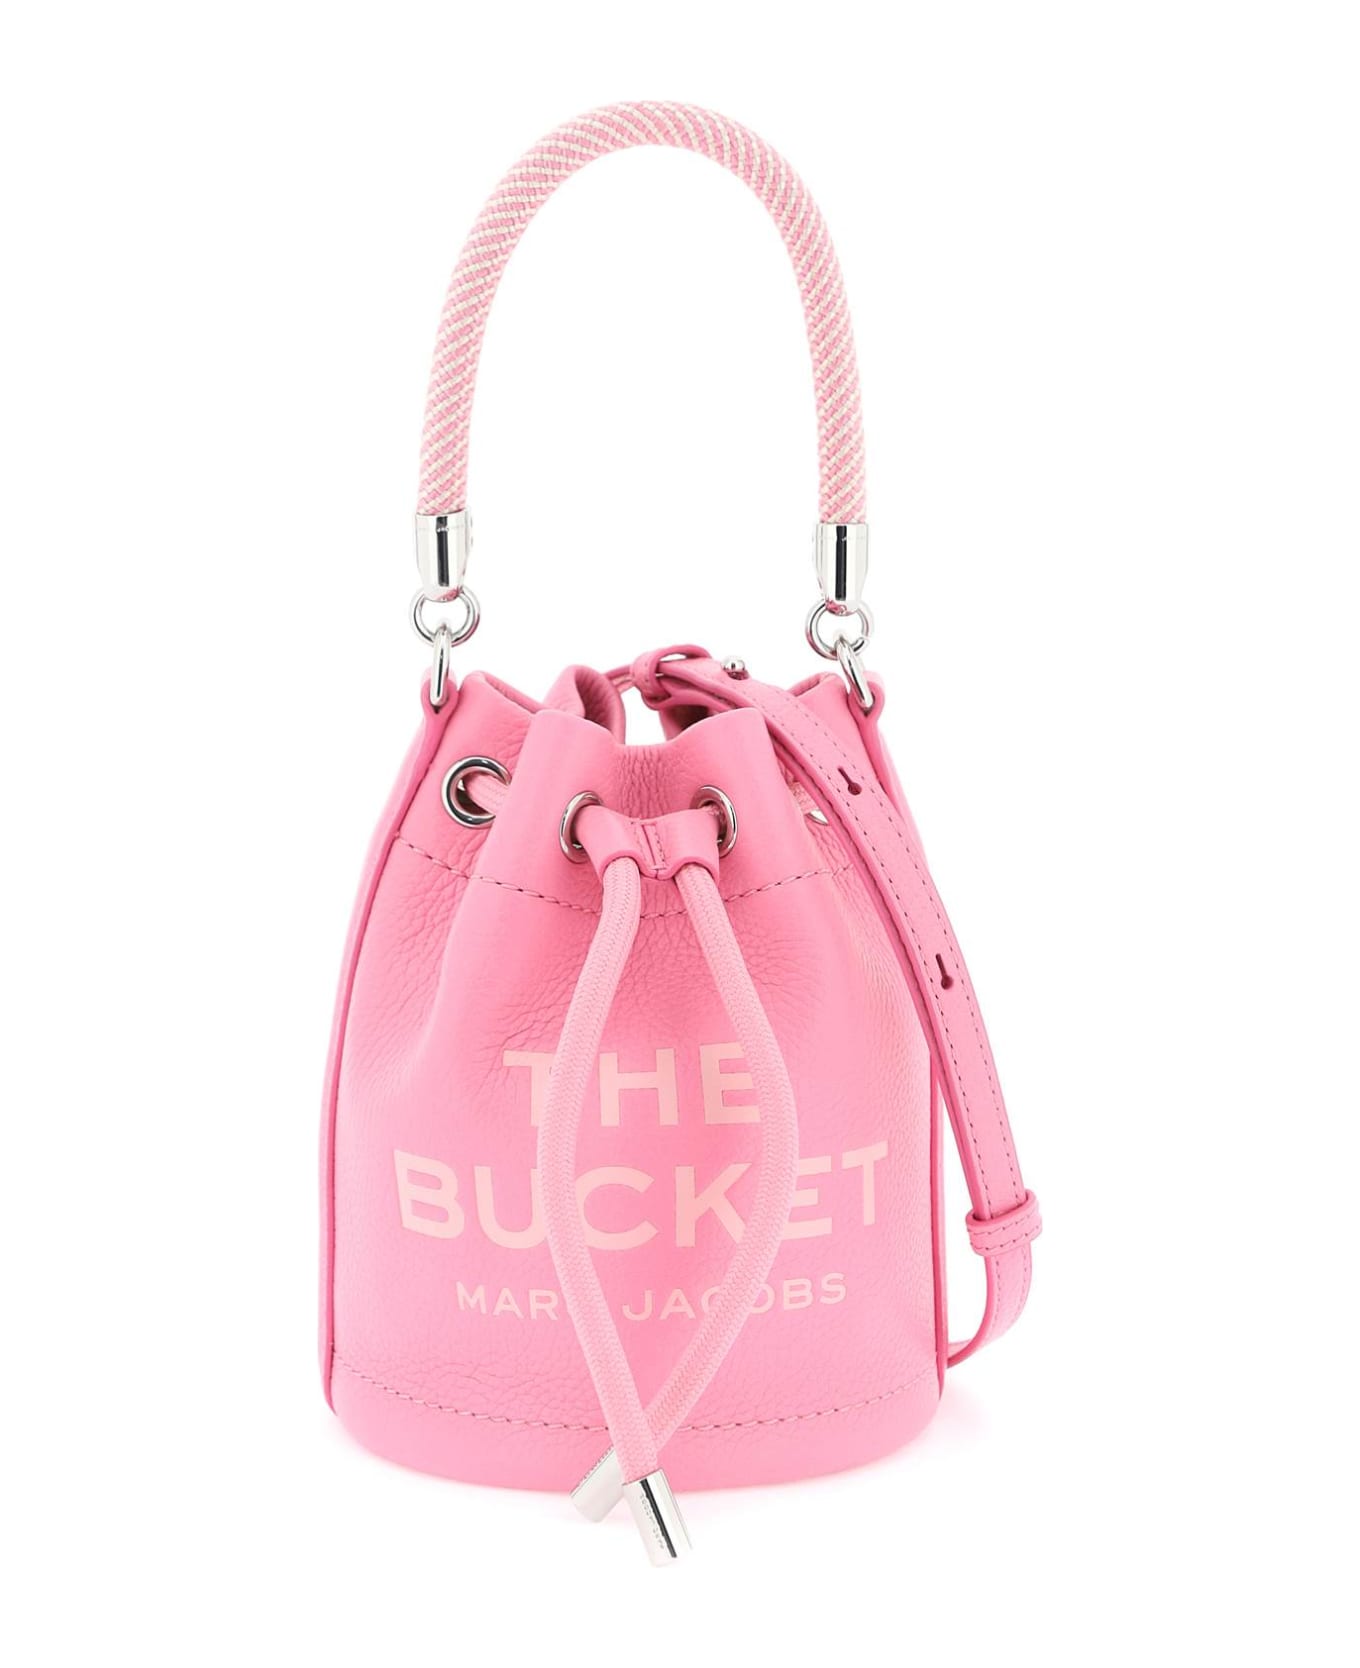 Marc Jacobs The Leather Bucket Bag - PETAL PINK (Pink)